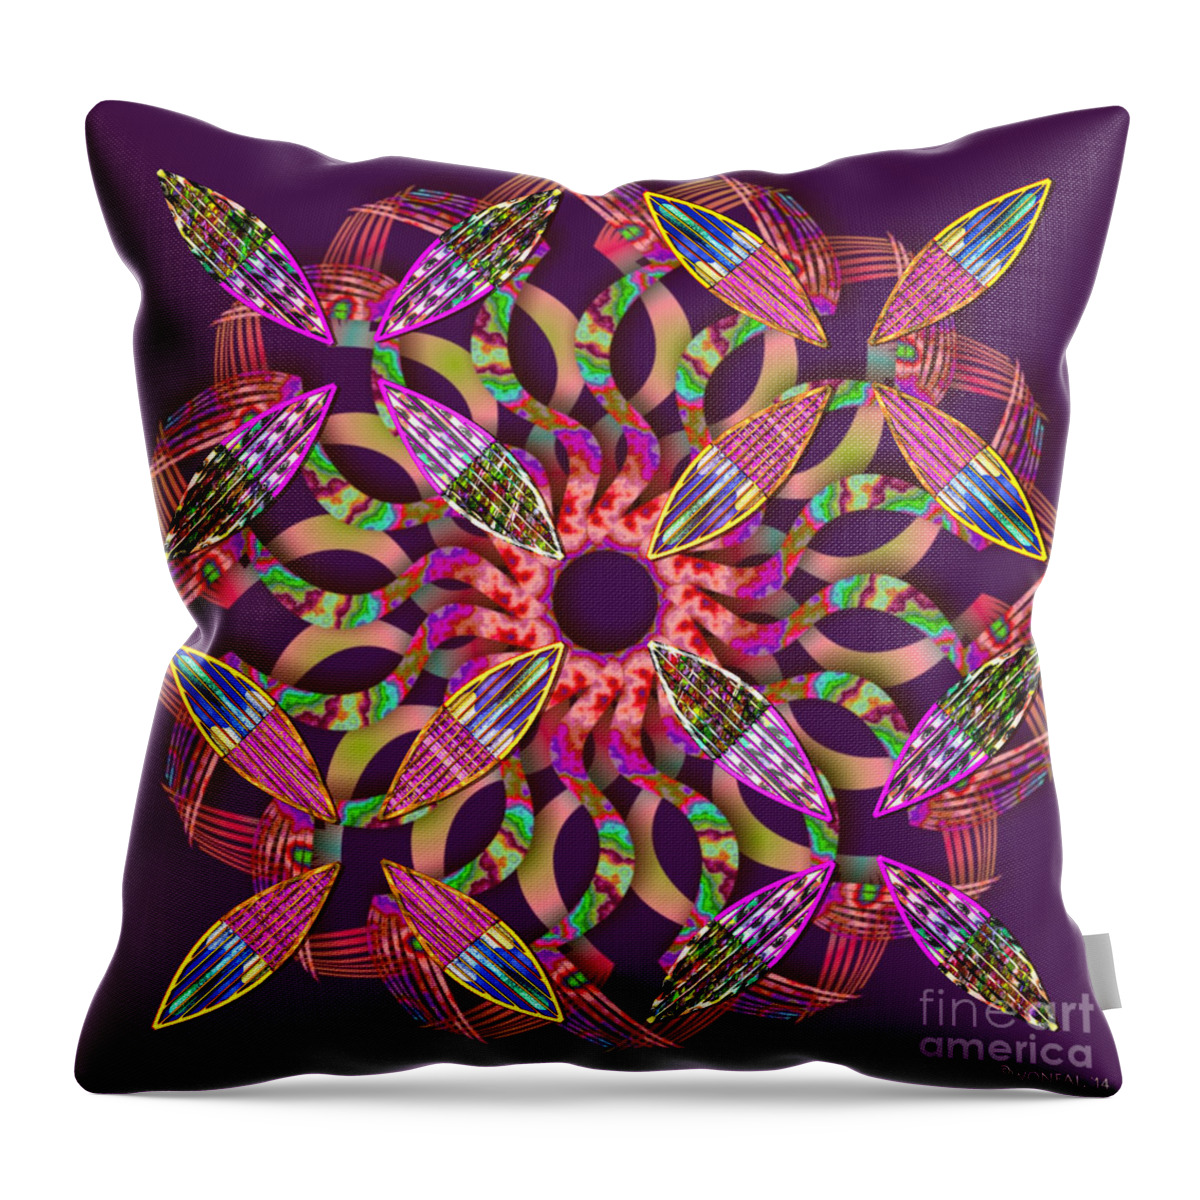 Conceptuals Throw Pillow featuring the digital art Blooming Mandala 1 by Walter Neal